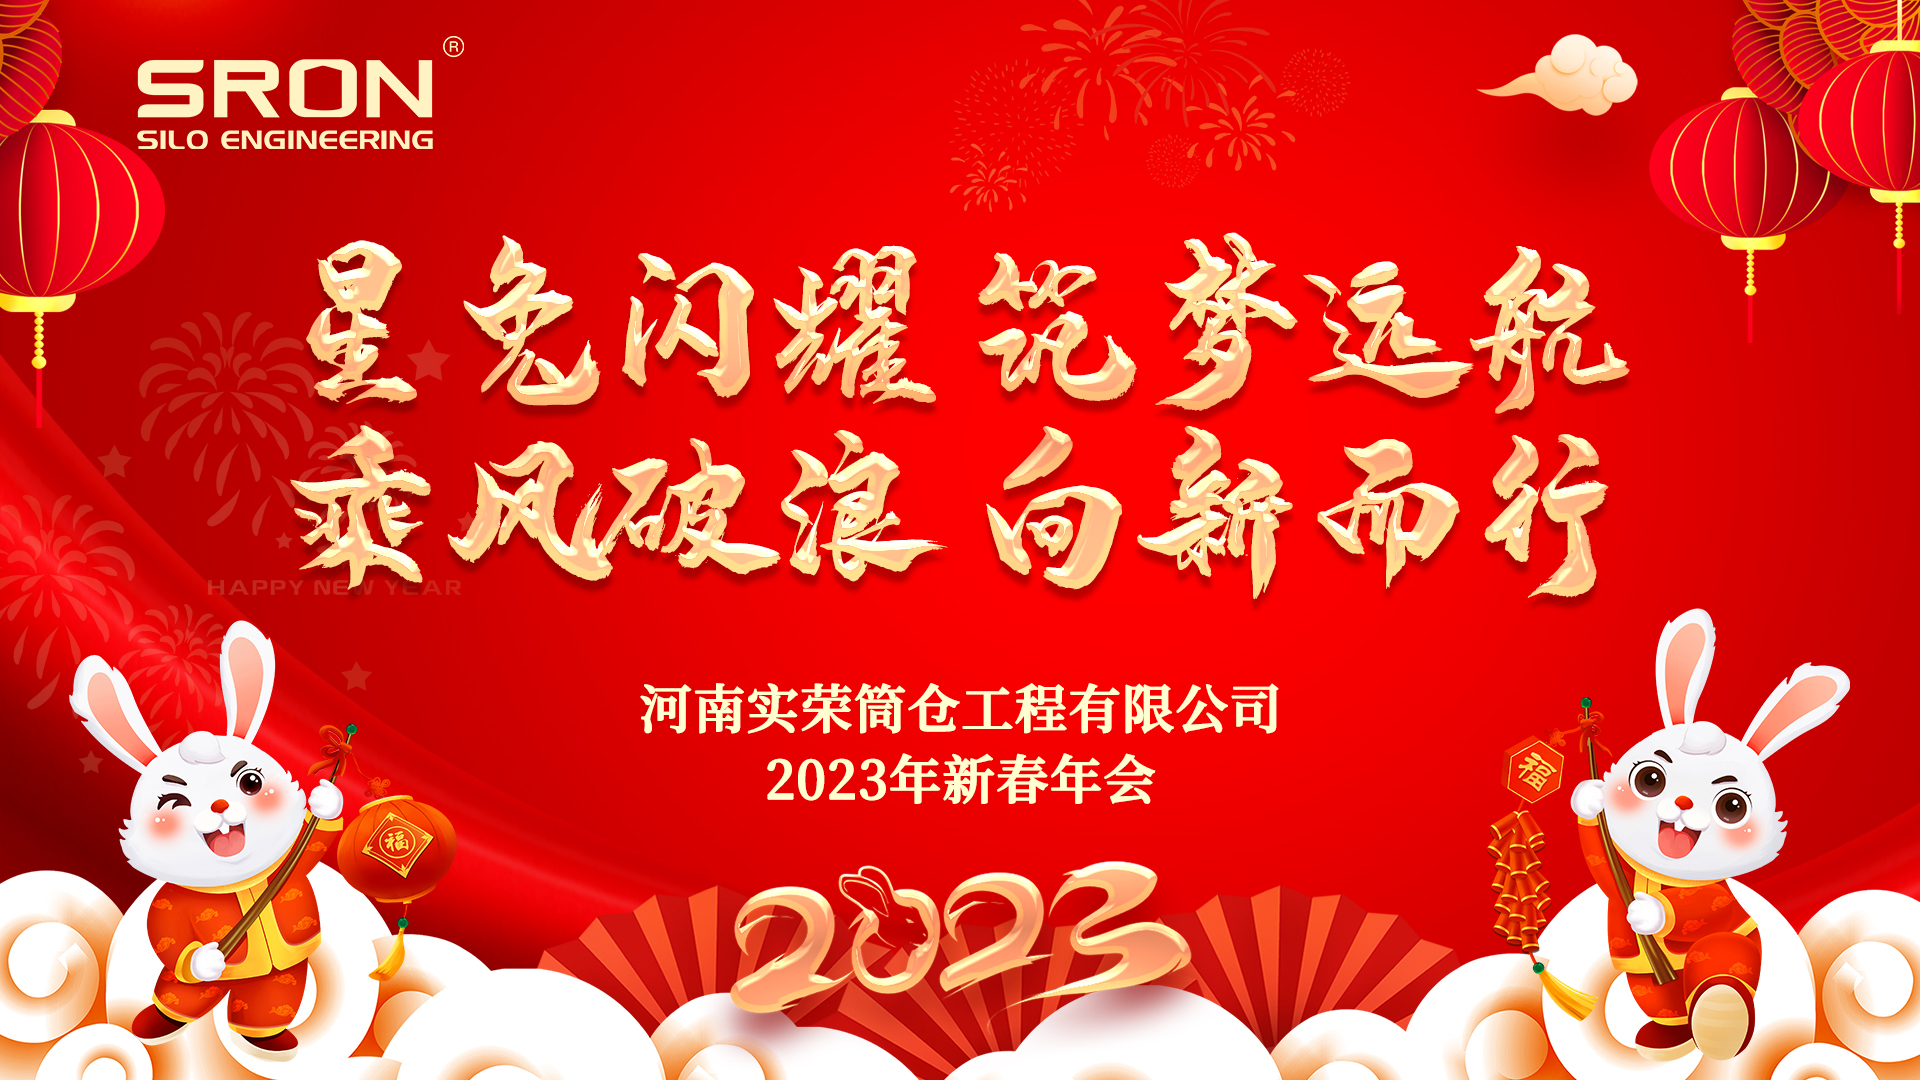 2023 Chinese New Year Annual Meeting of Henan SRON Silo Engineering Company